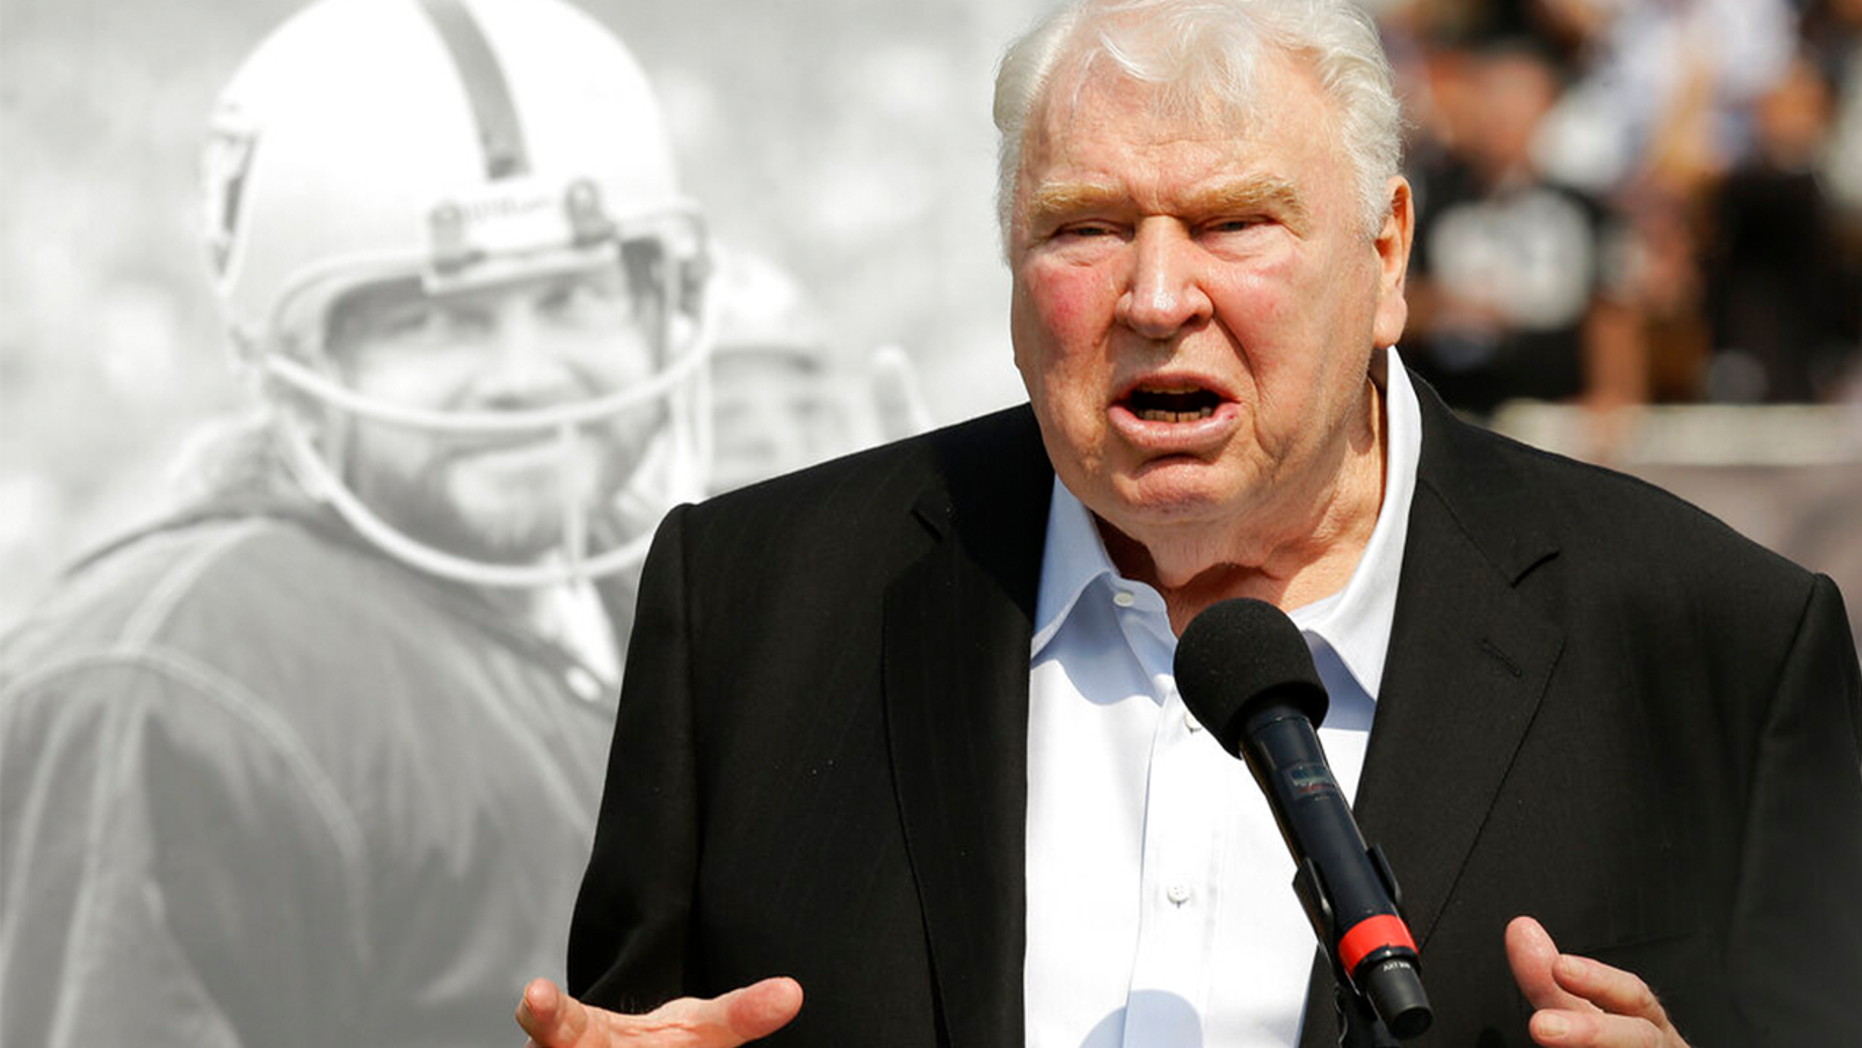 NFL legend John Madden passes away suddenly at the age of 85